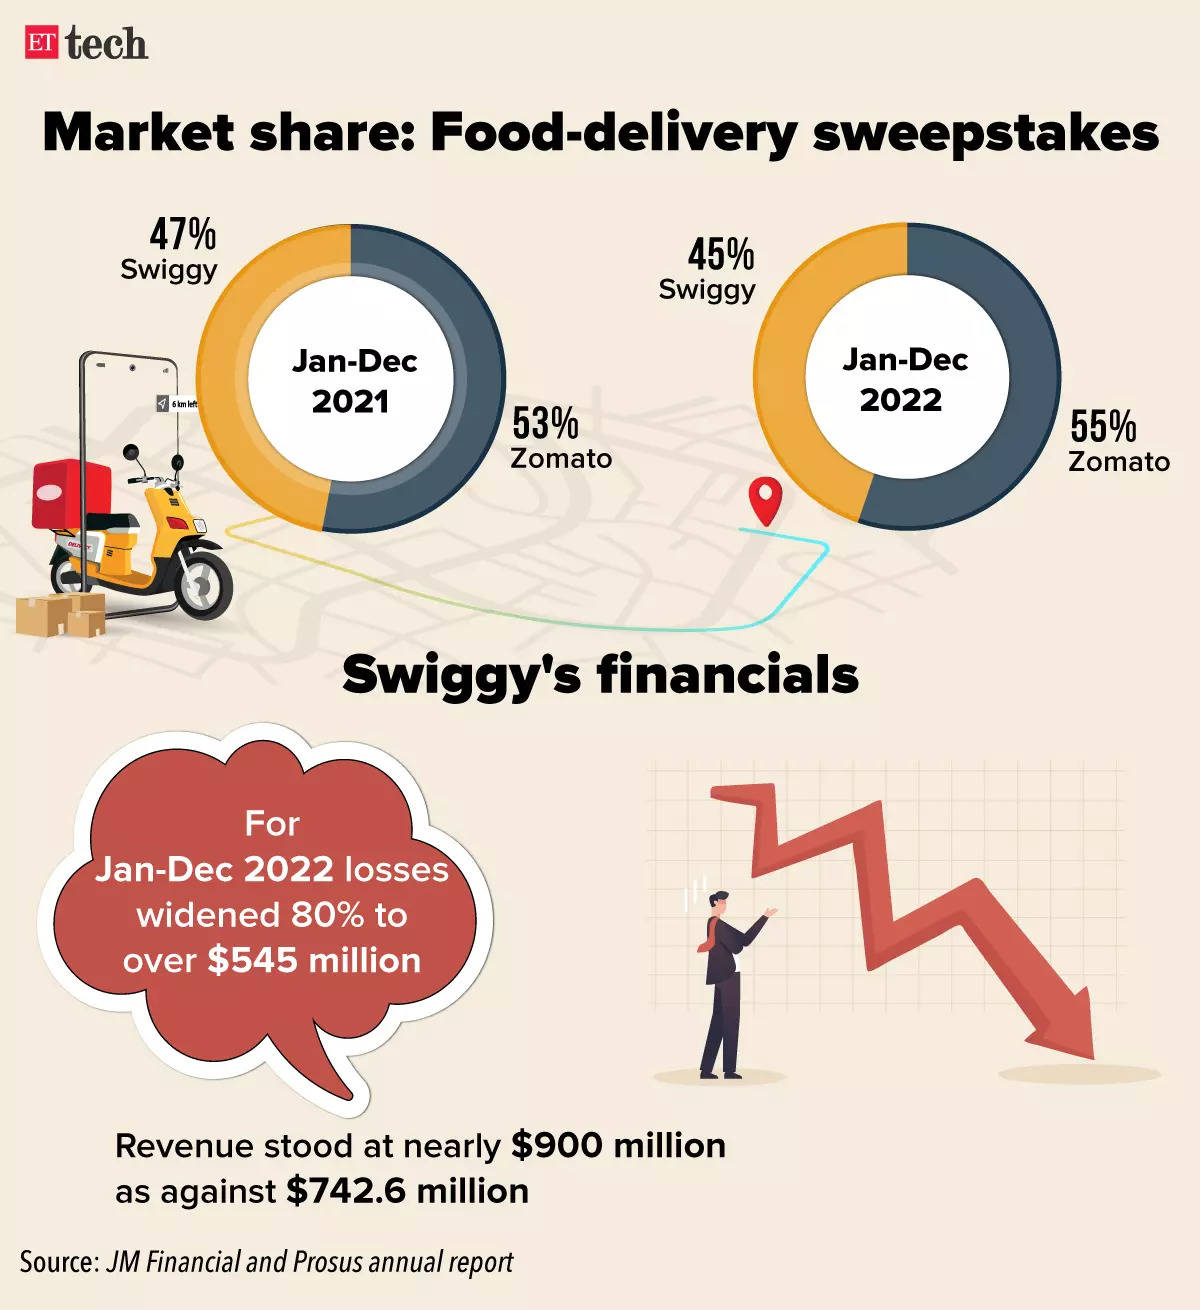 Swiggy flipped its focus to growth, says food biz CEO Rohit Kapoor